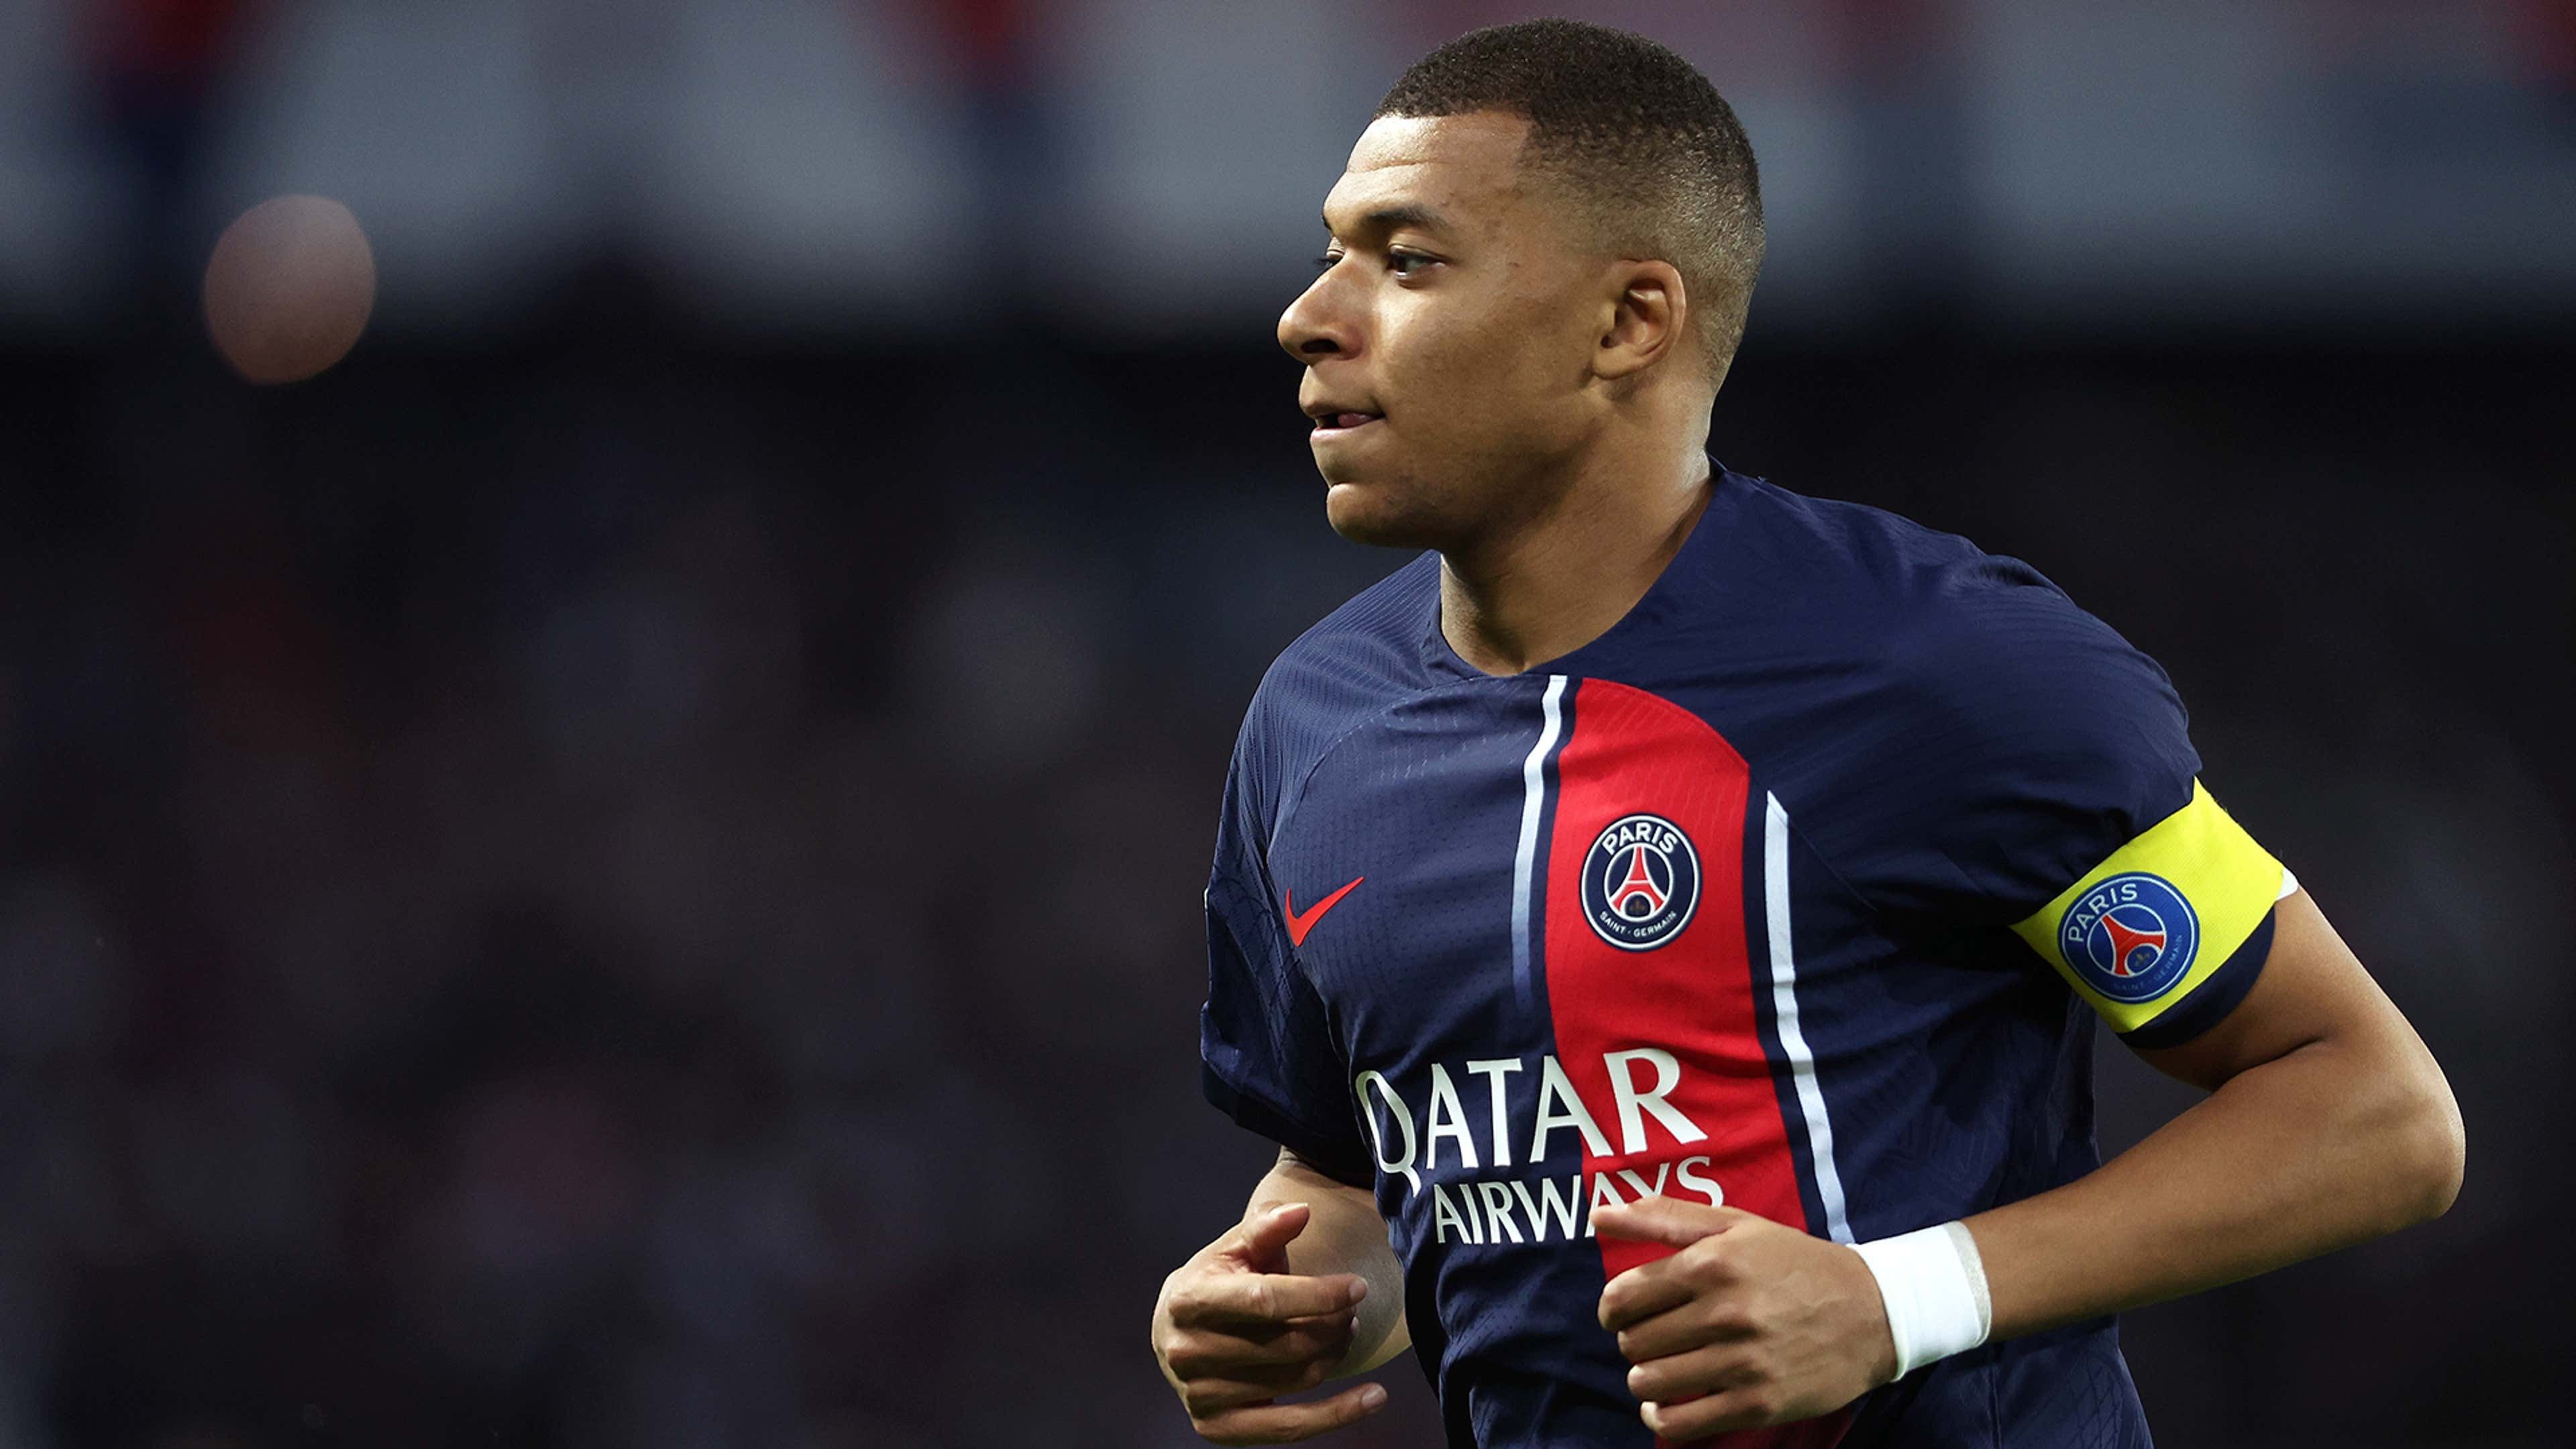 Mbappe Takes Legal Action Against Marseille Eatery For Insensitive Menu Item